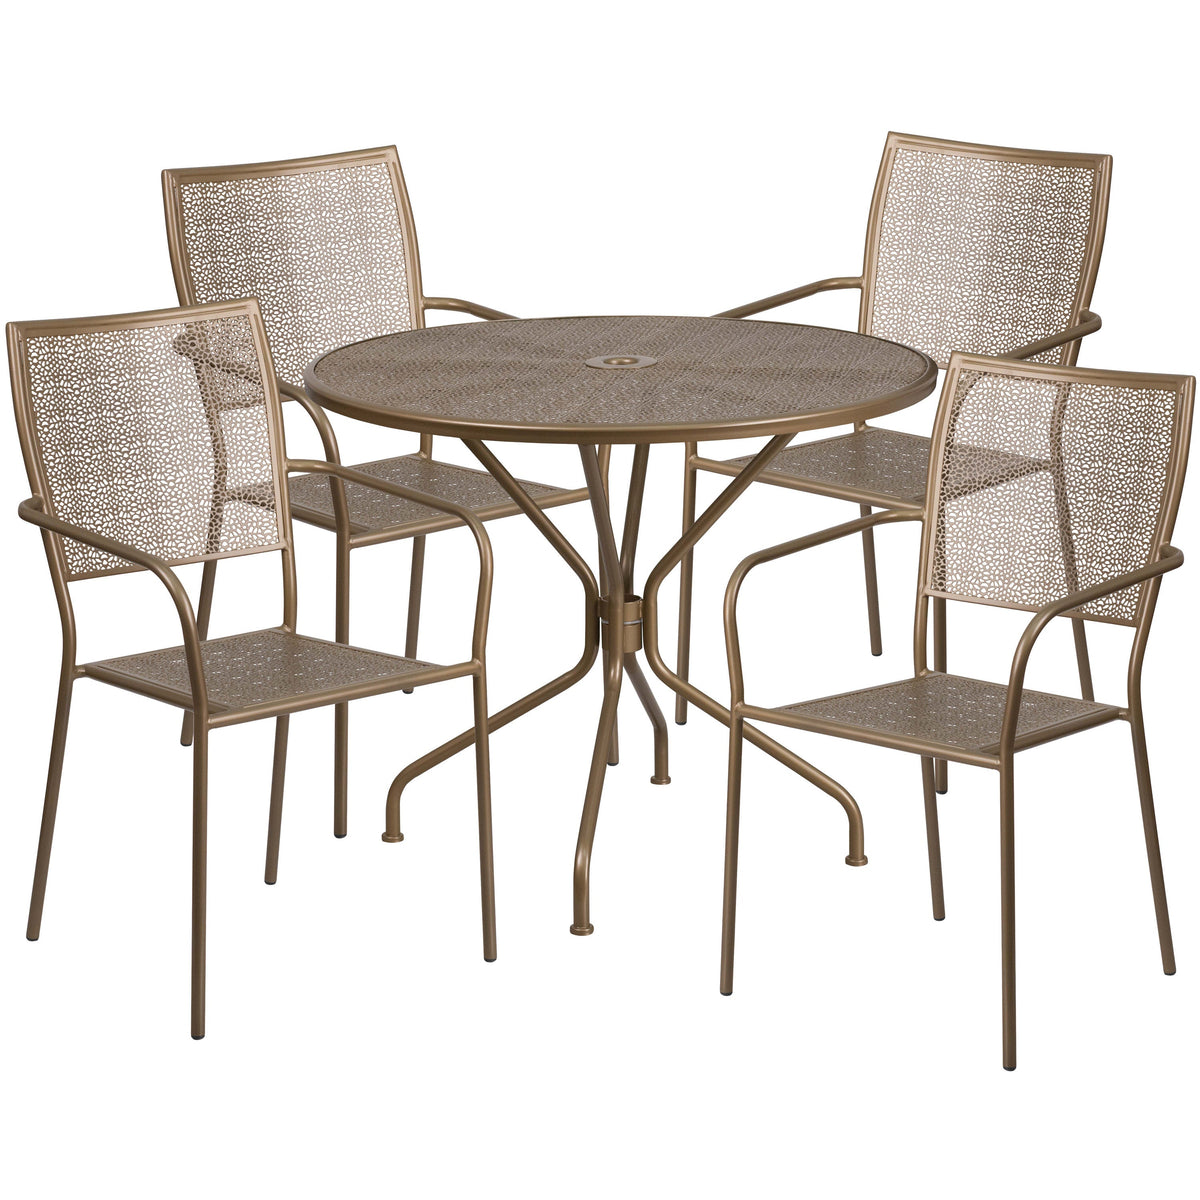 Gold |#| 35.25inch Round Gold Indoor-Outdoor Steel Patio Table Set w/ 4 Square Back Chairs